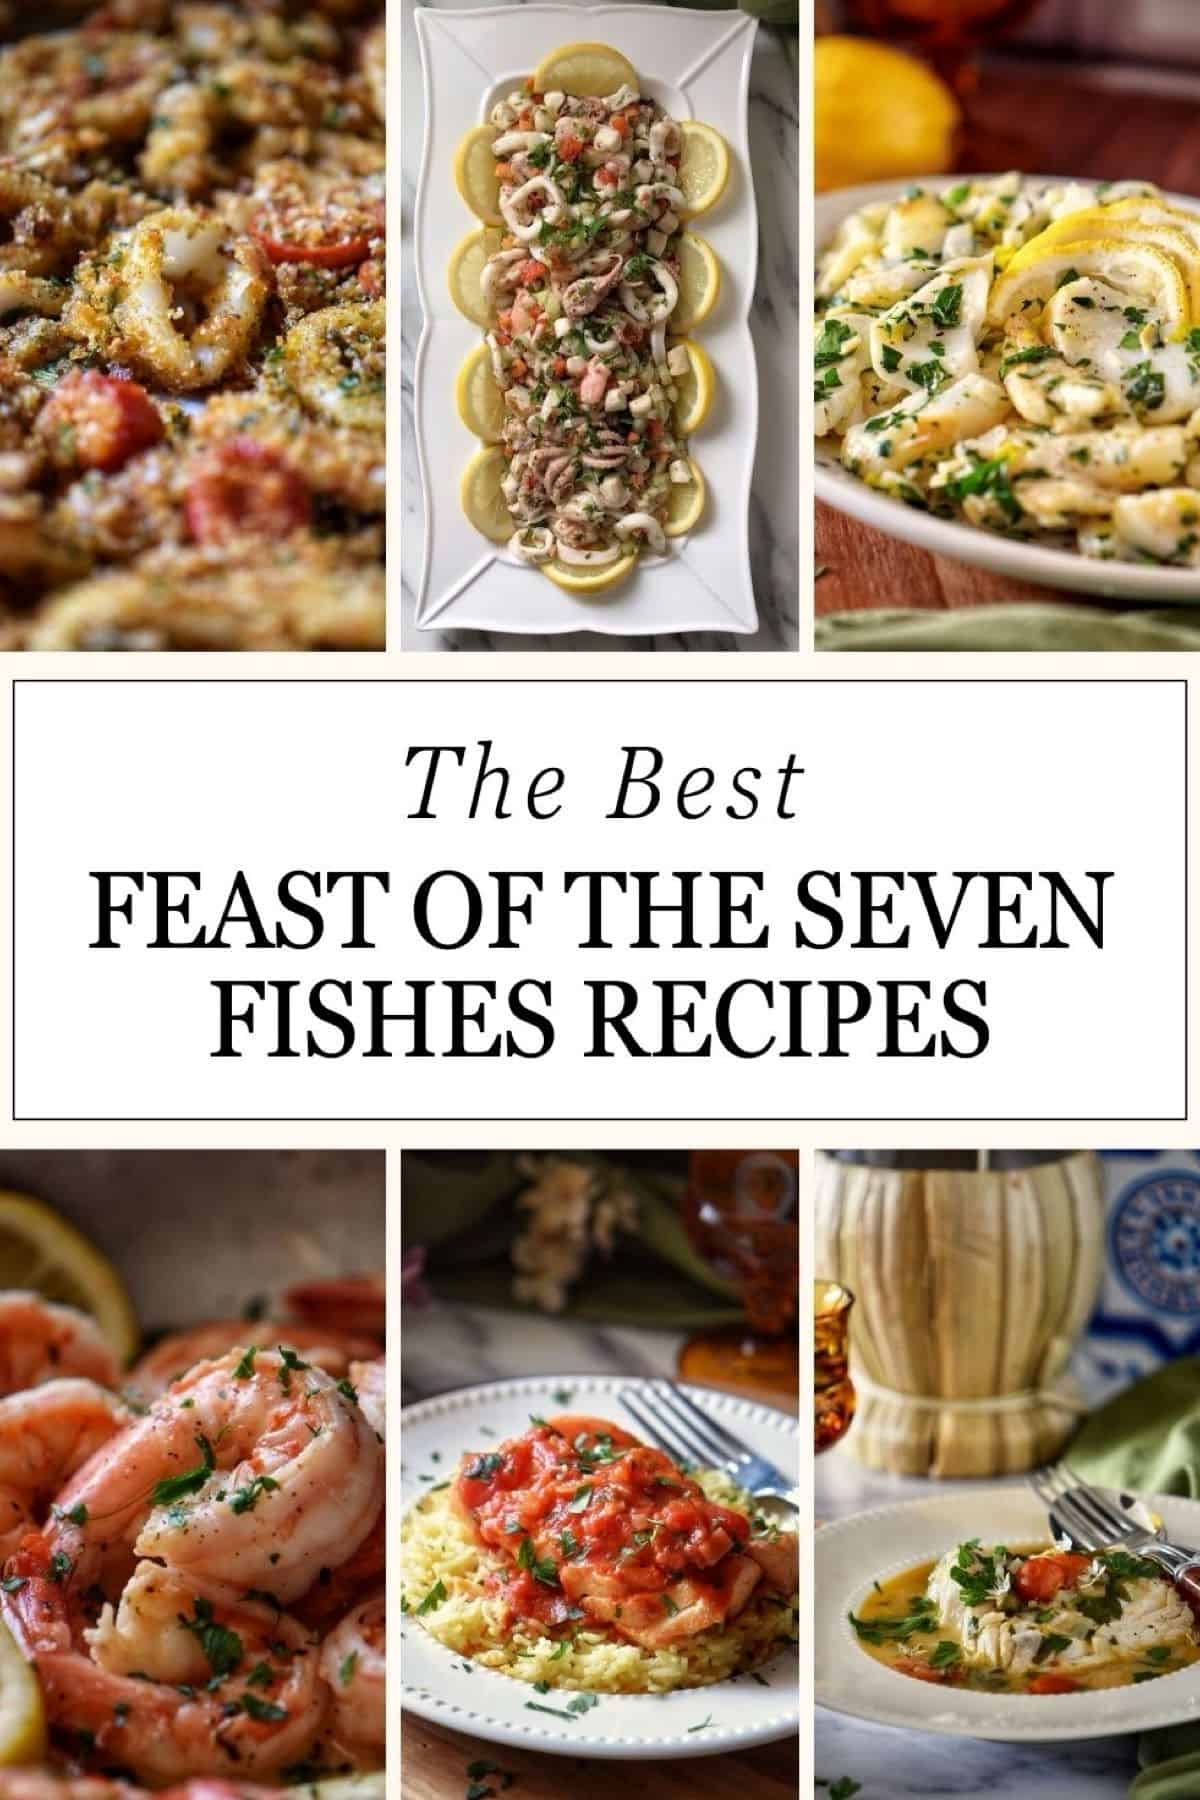 A photo collage of fish recipes for the Feast of the Seven fishes.